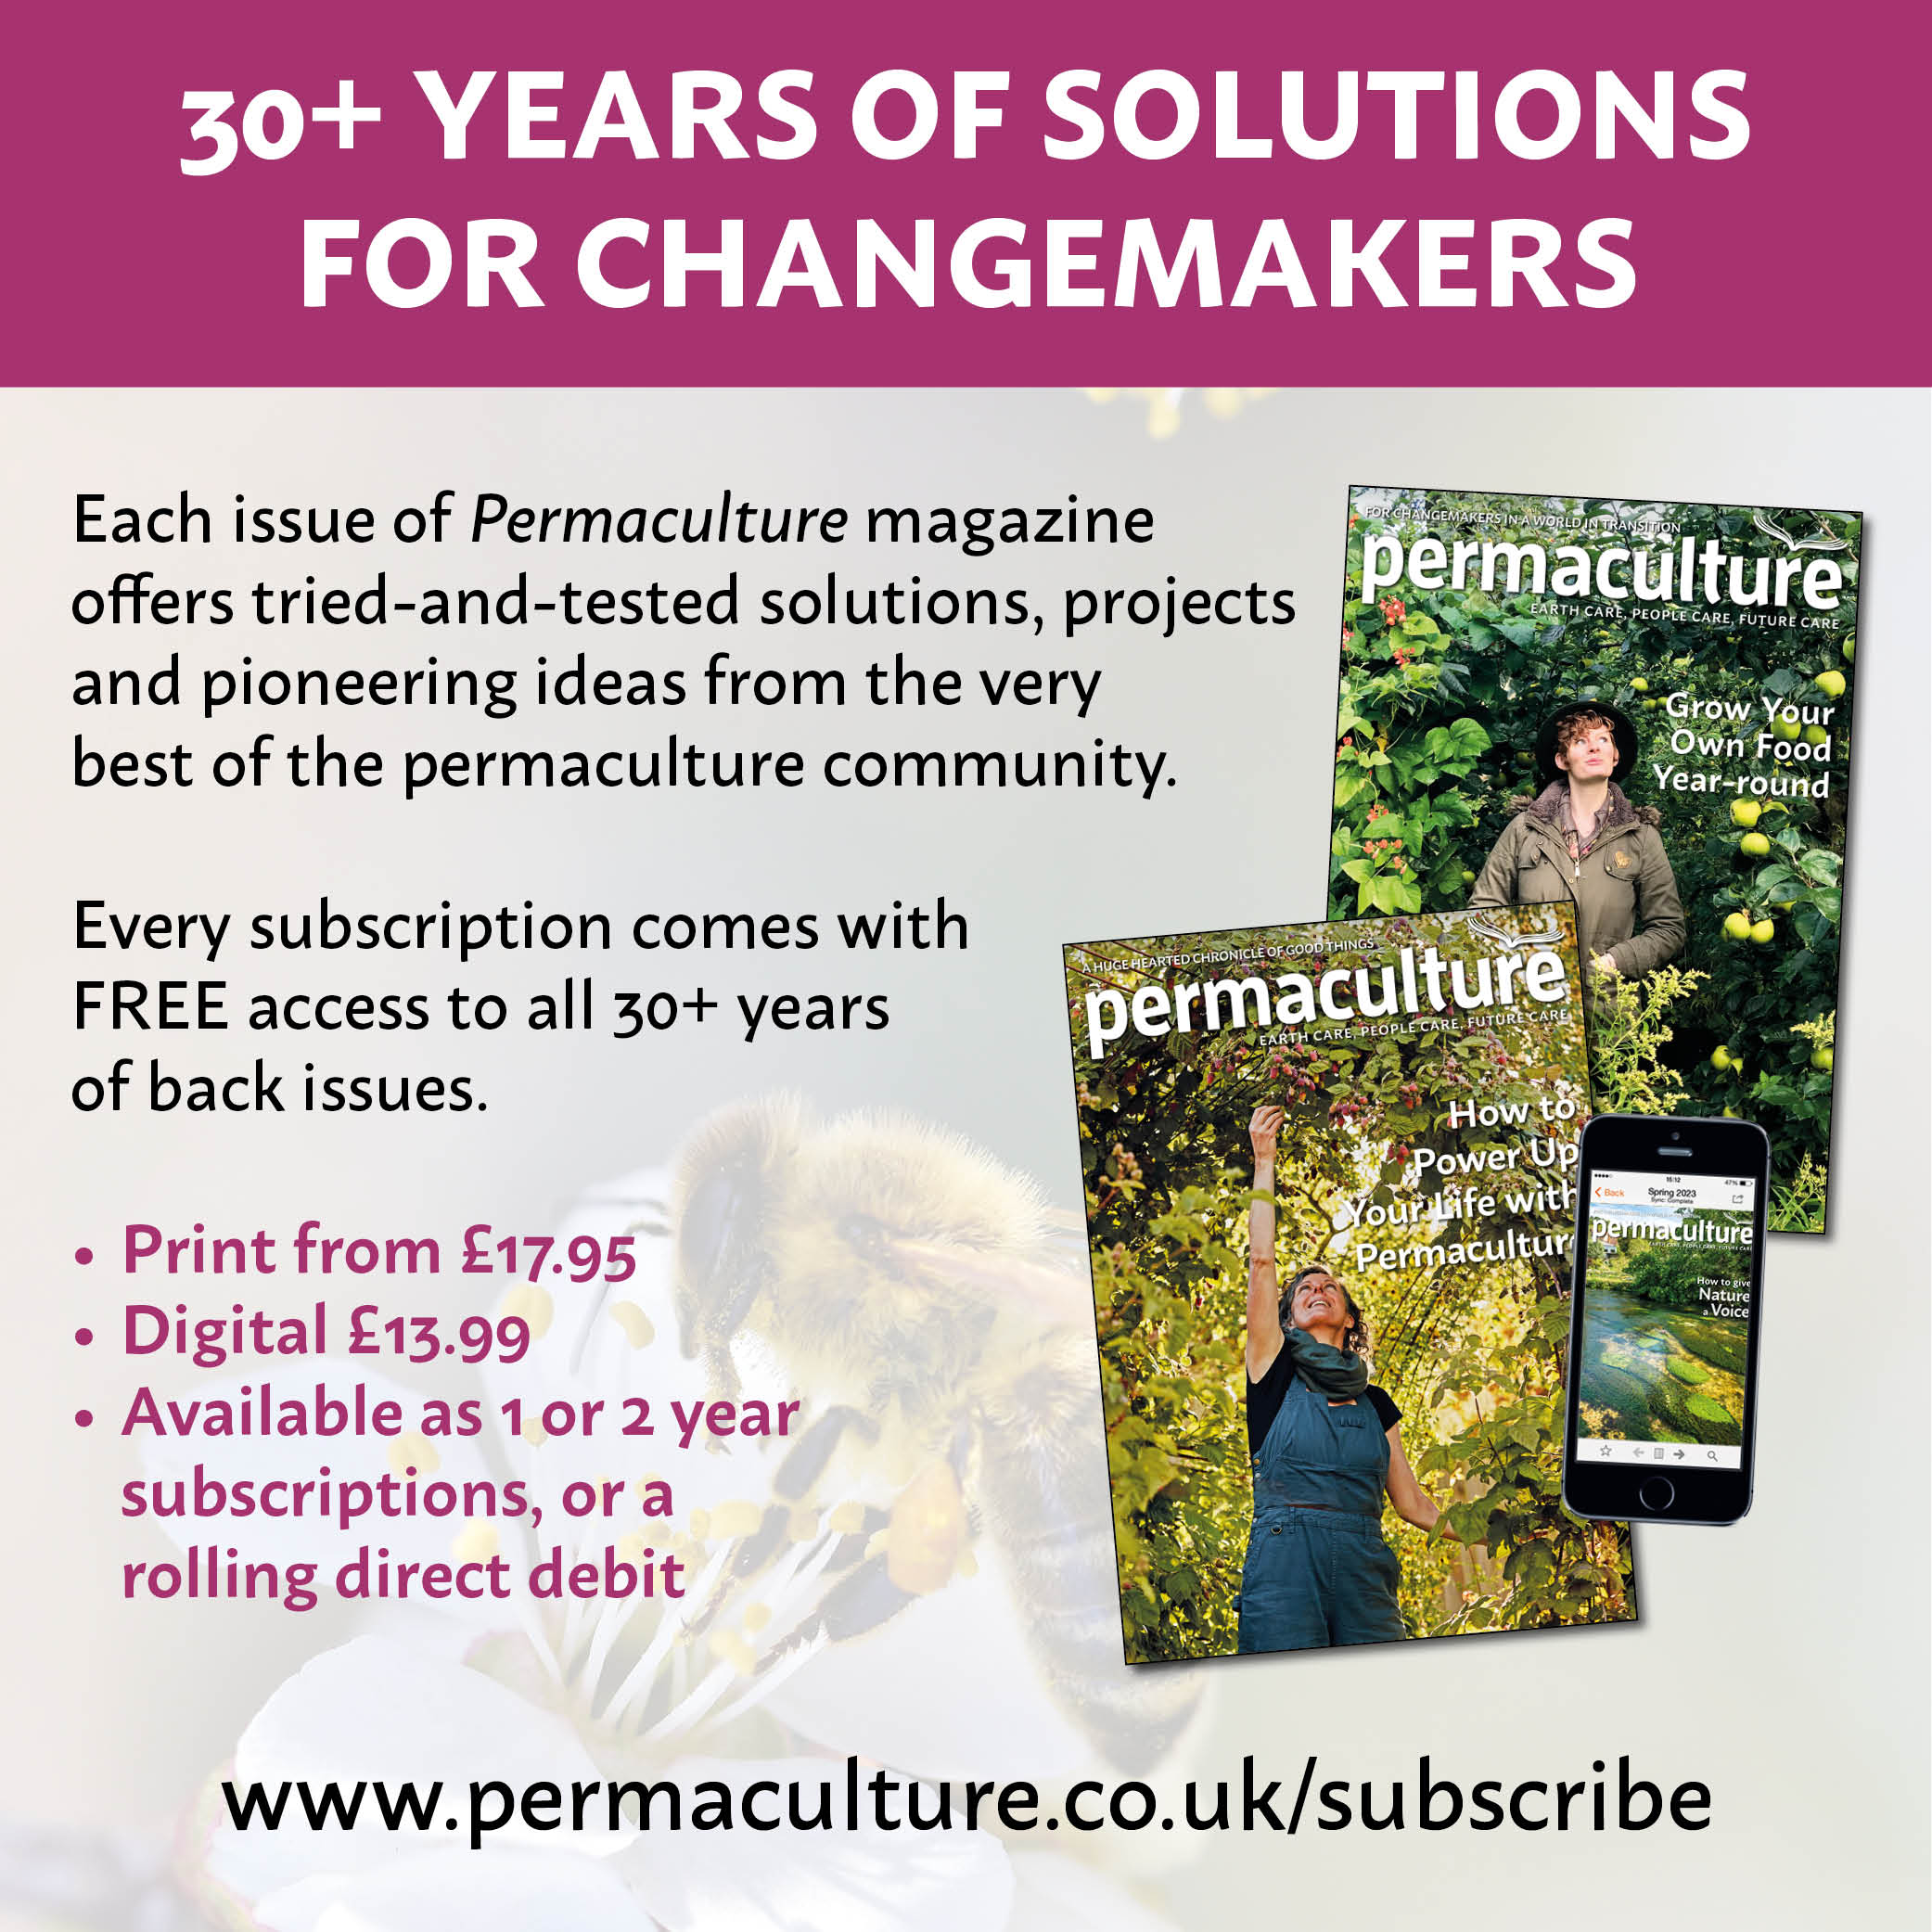 Each issue of Permaculture magazine offers tried-and-tested solutions, projects and pioneering ideas from the very best of the permaculture community. Every subscription comes with FREE access to all 30+ years of back issues.